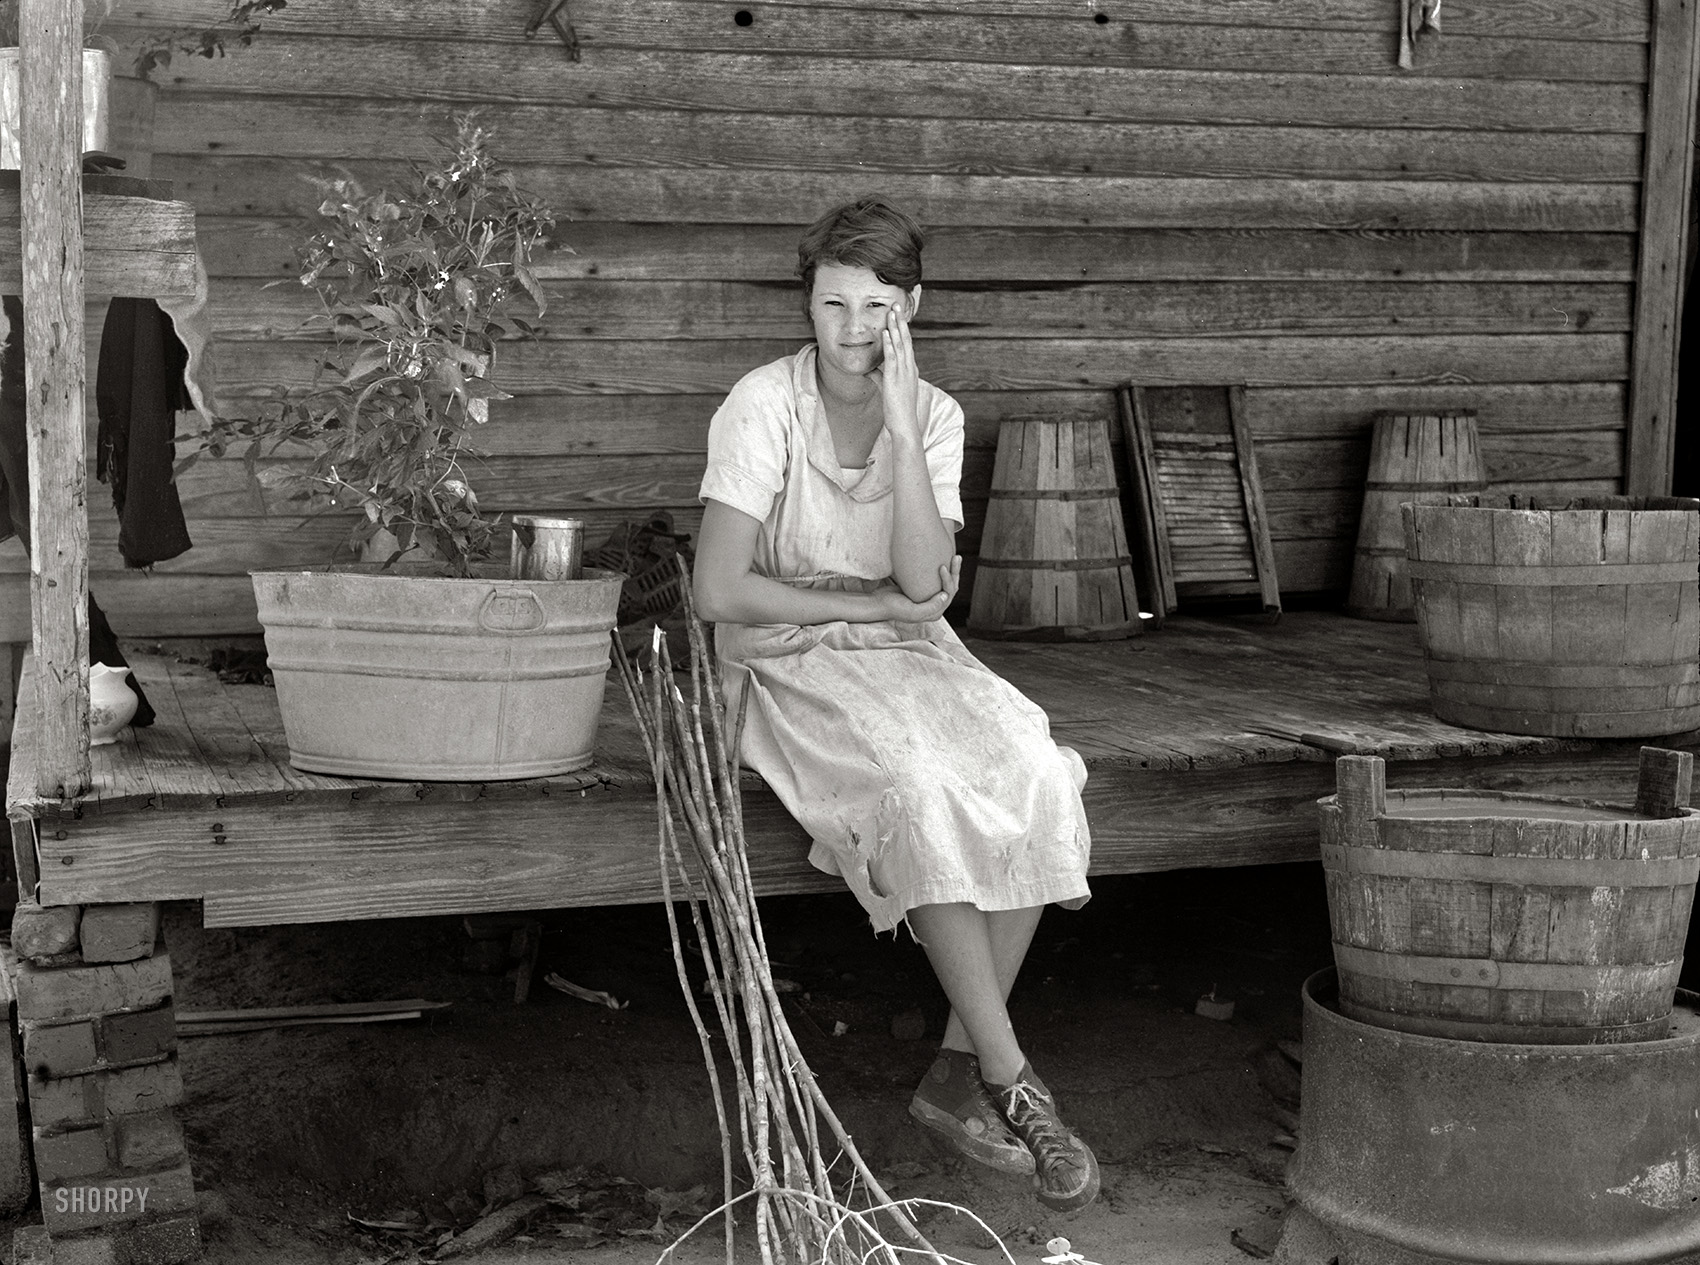 Sept. 1935. "Daughter of farmer who will be resettled. Wolf Creek Farms, Ga." Photo by Arthur Rothstein for the Resettlement Administration. View full size.